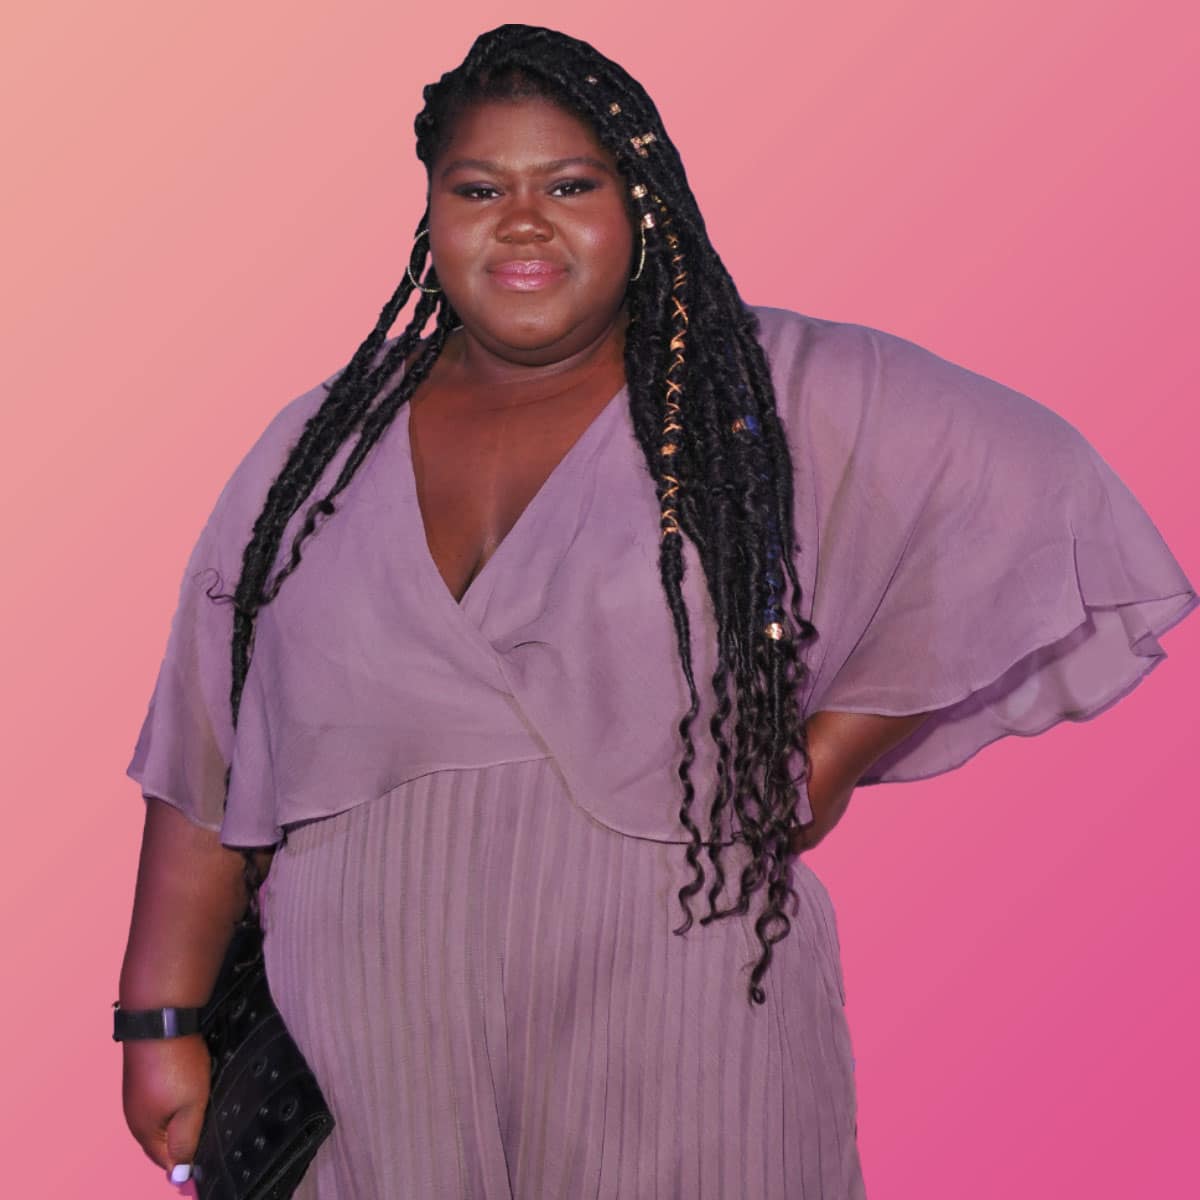 Gabourey Sidibe Shares Why Making Her Directorial Debut As A Black Woman Was A 'Fight' She Was Ready For